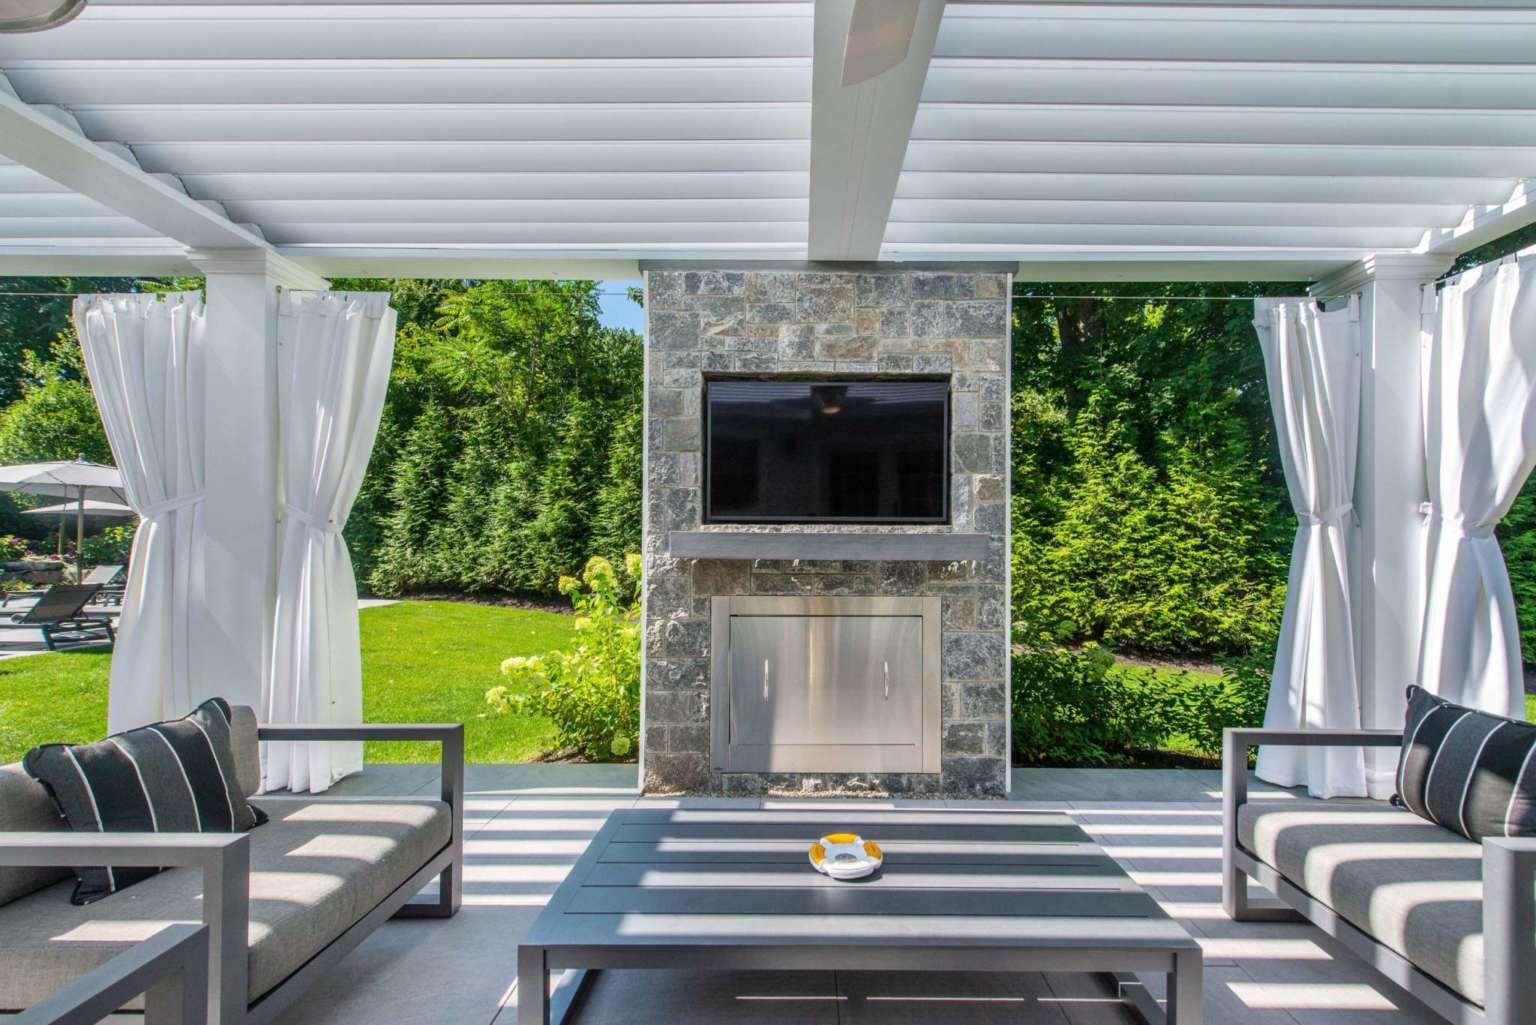 The Ultimate Adjustable Patio Cover Solution for Outdoor Living